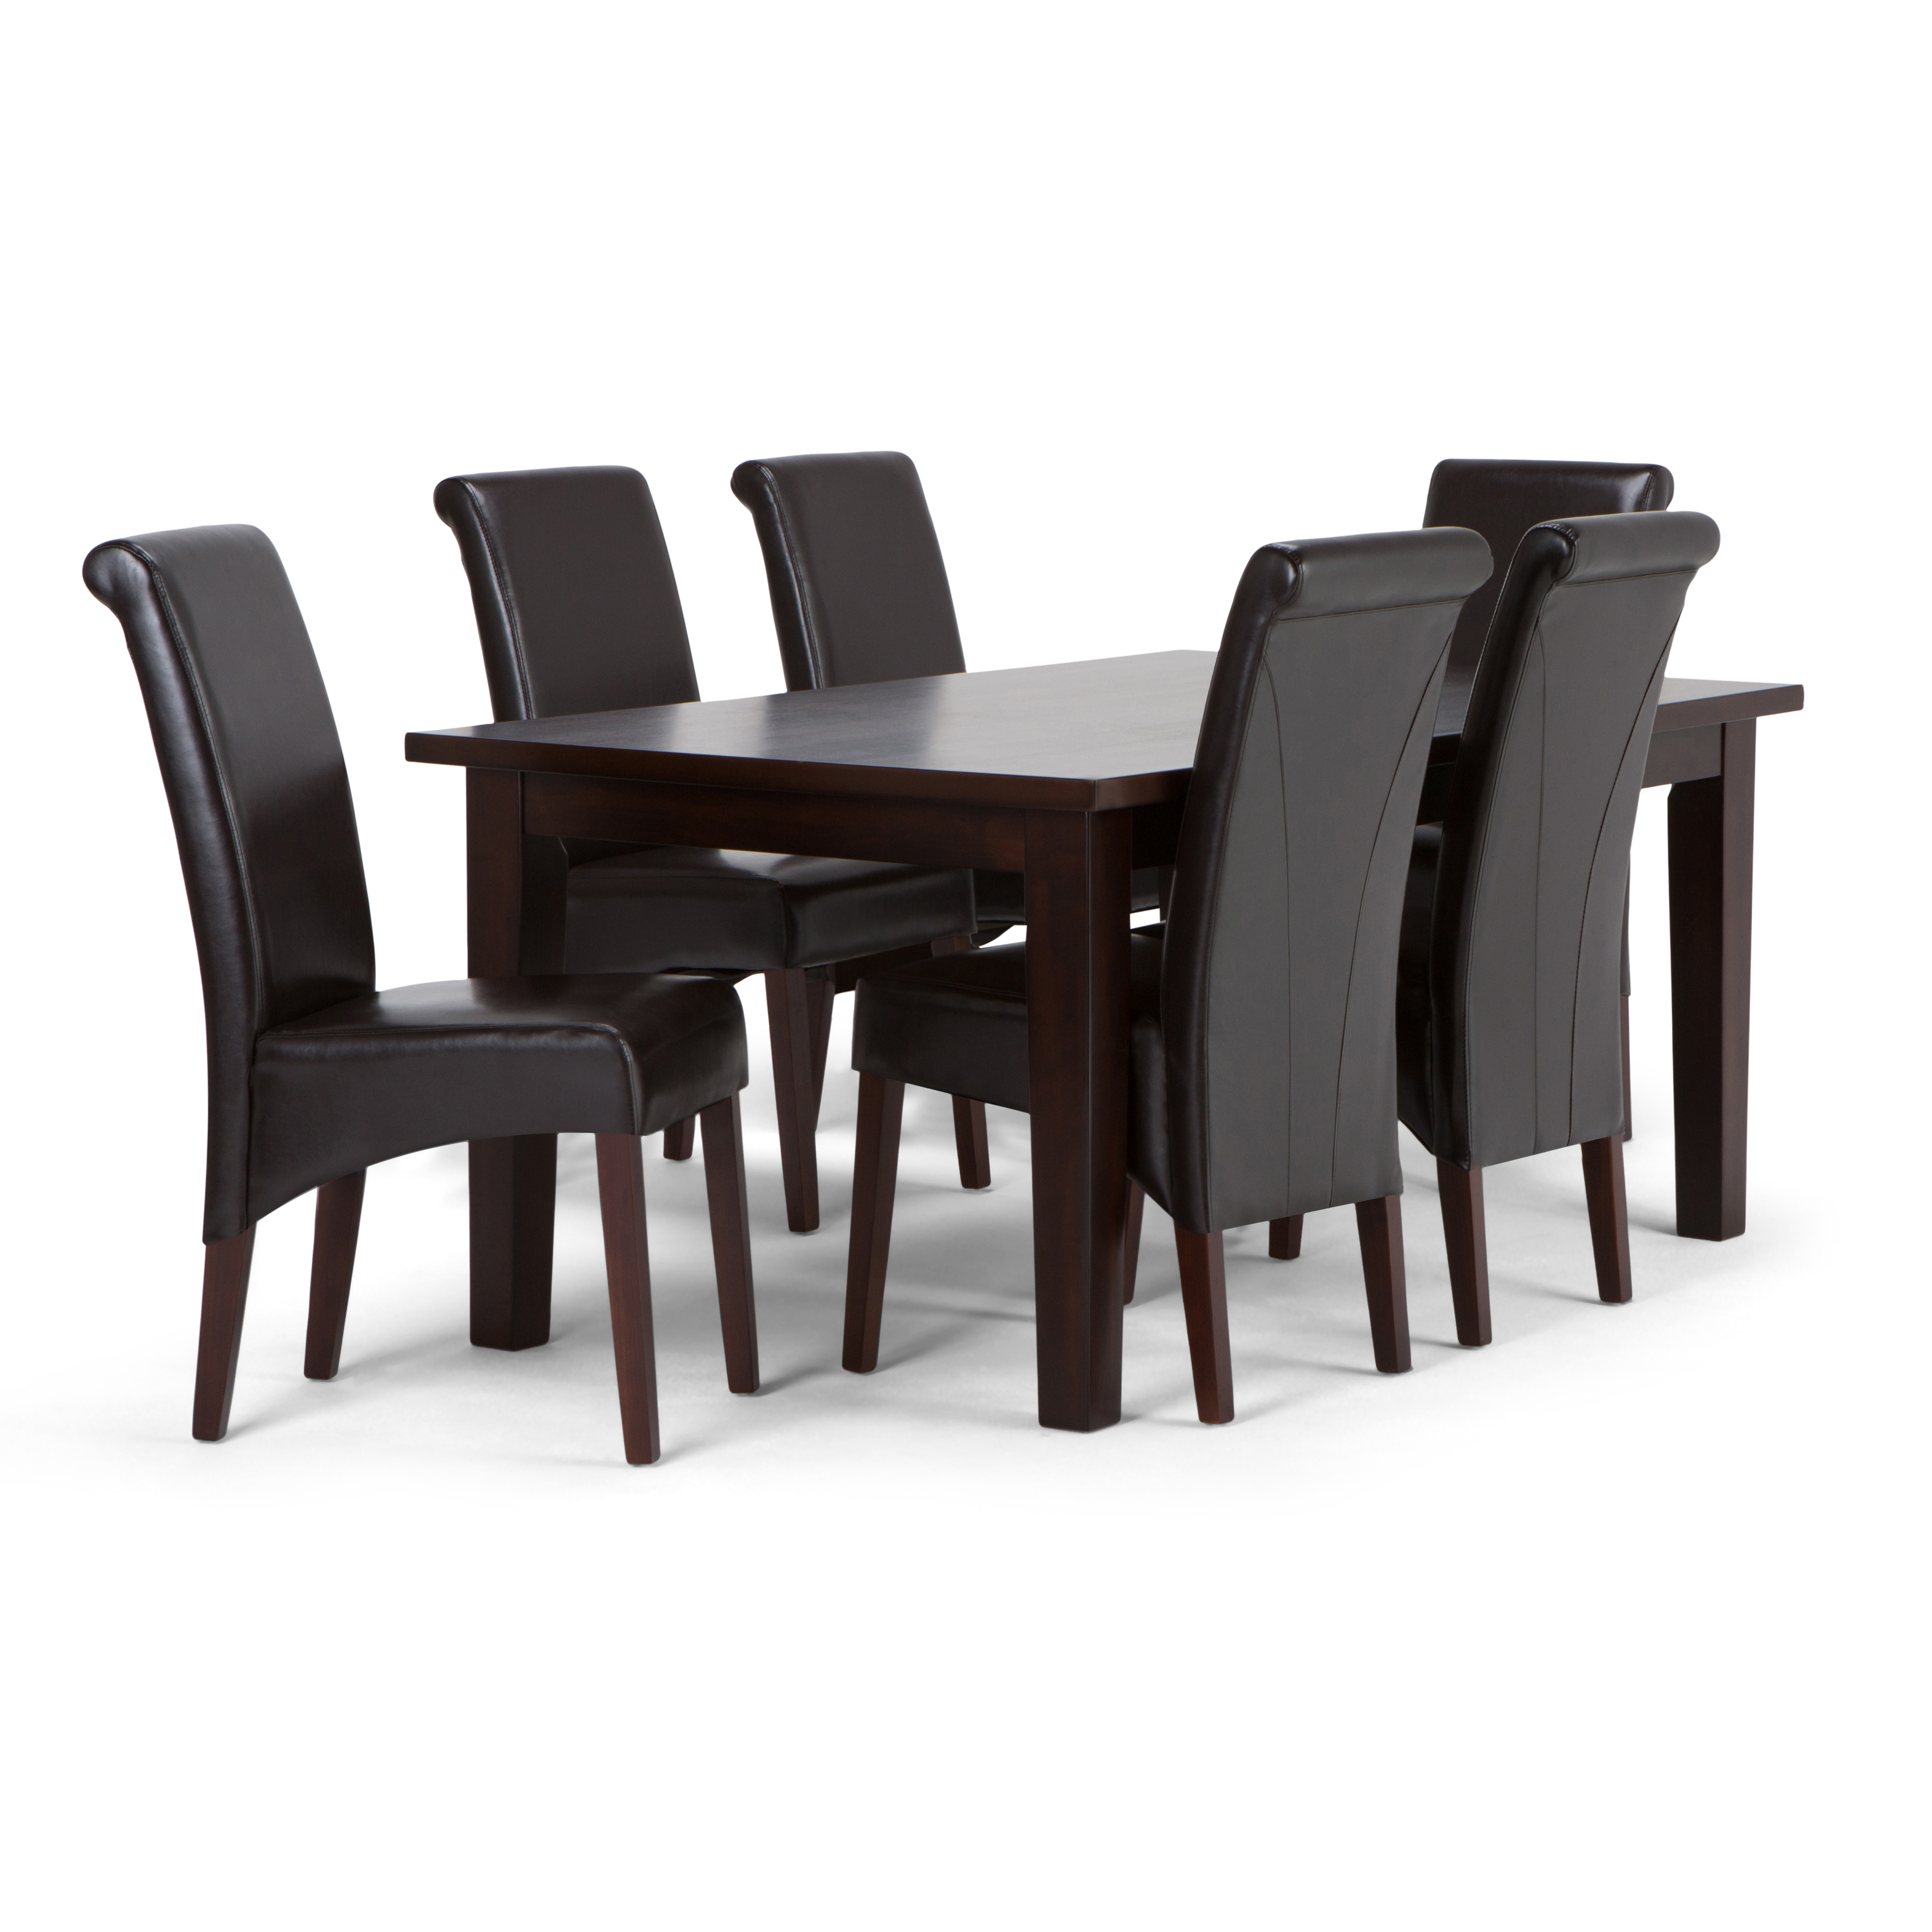 Avalon Transitional 9 Pc Dining Set with 6 Upholstered Dining Chairs in Dove Grey Linen Look Fabric and 54 inch Wide Table-Finish:Tanners Brown,Number of Items:7 Piece - image 1 of 2